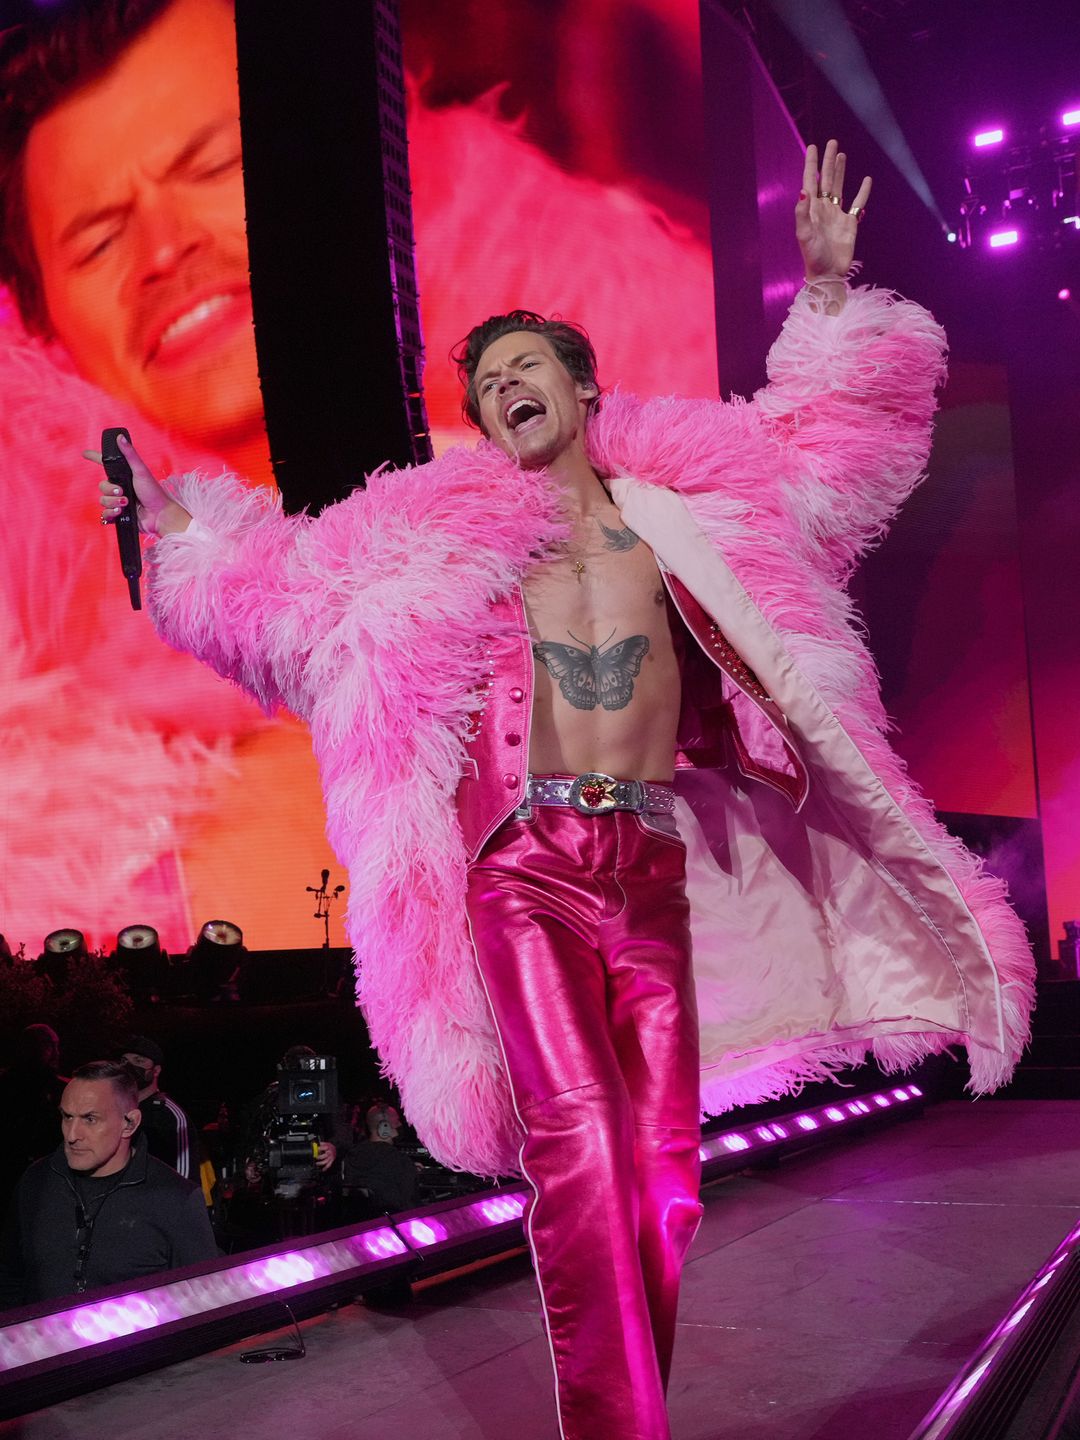 Harry Styles wears metallic pink pants and a feather coat to perform on stage at Coachella 2022